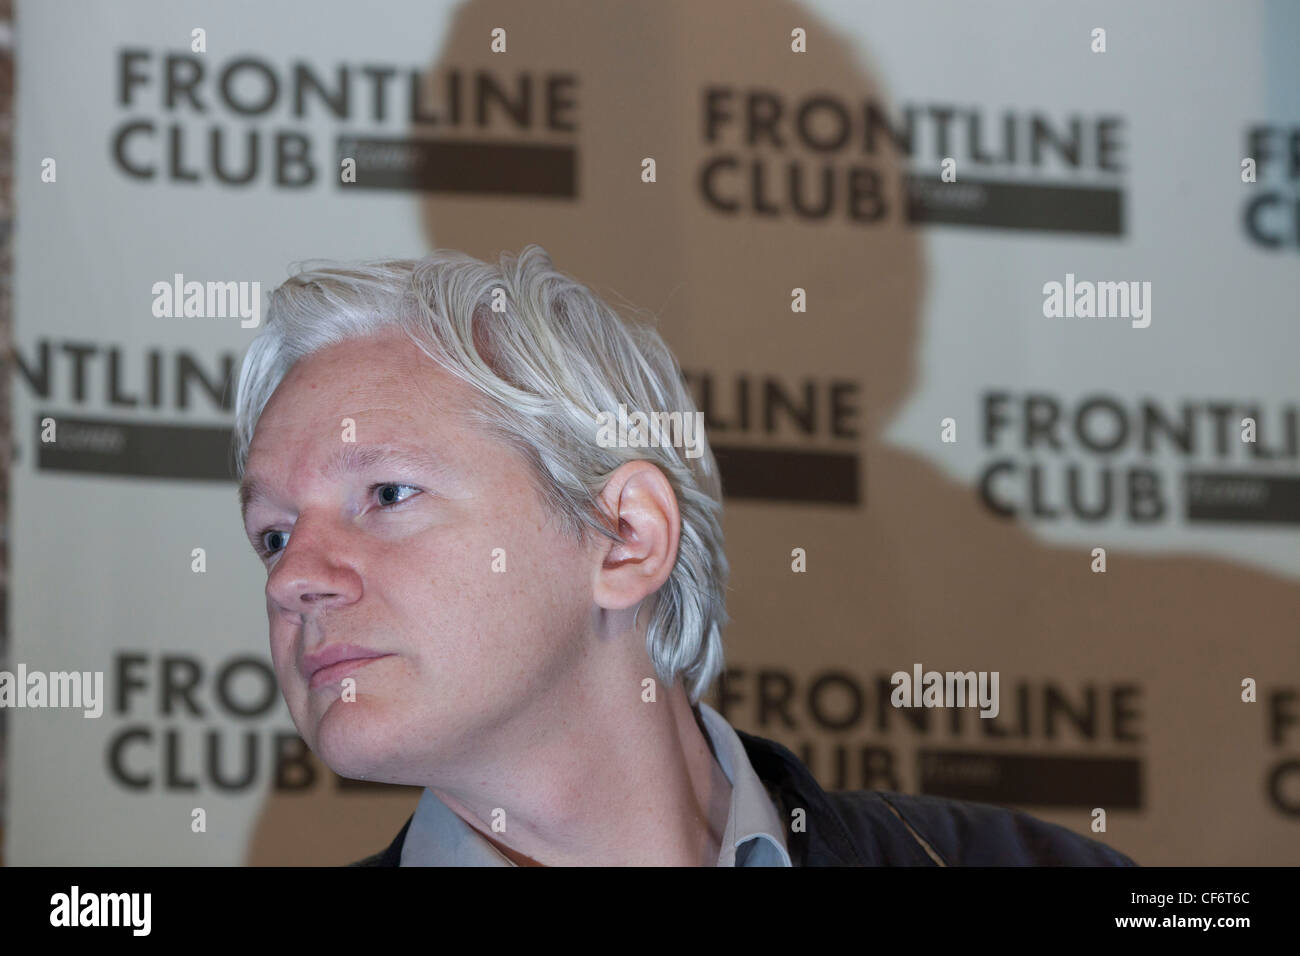 Julian Assange Wikileaks founder is seen during a press conference at The Frontline Club London Stock Photo